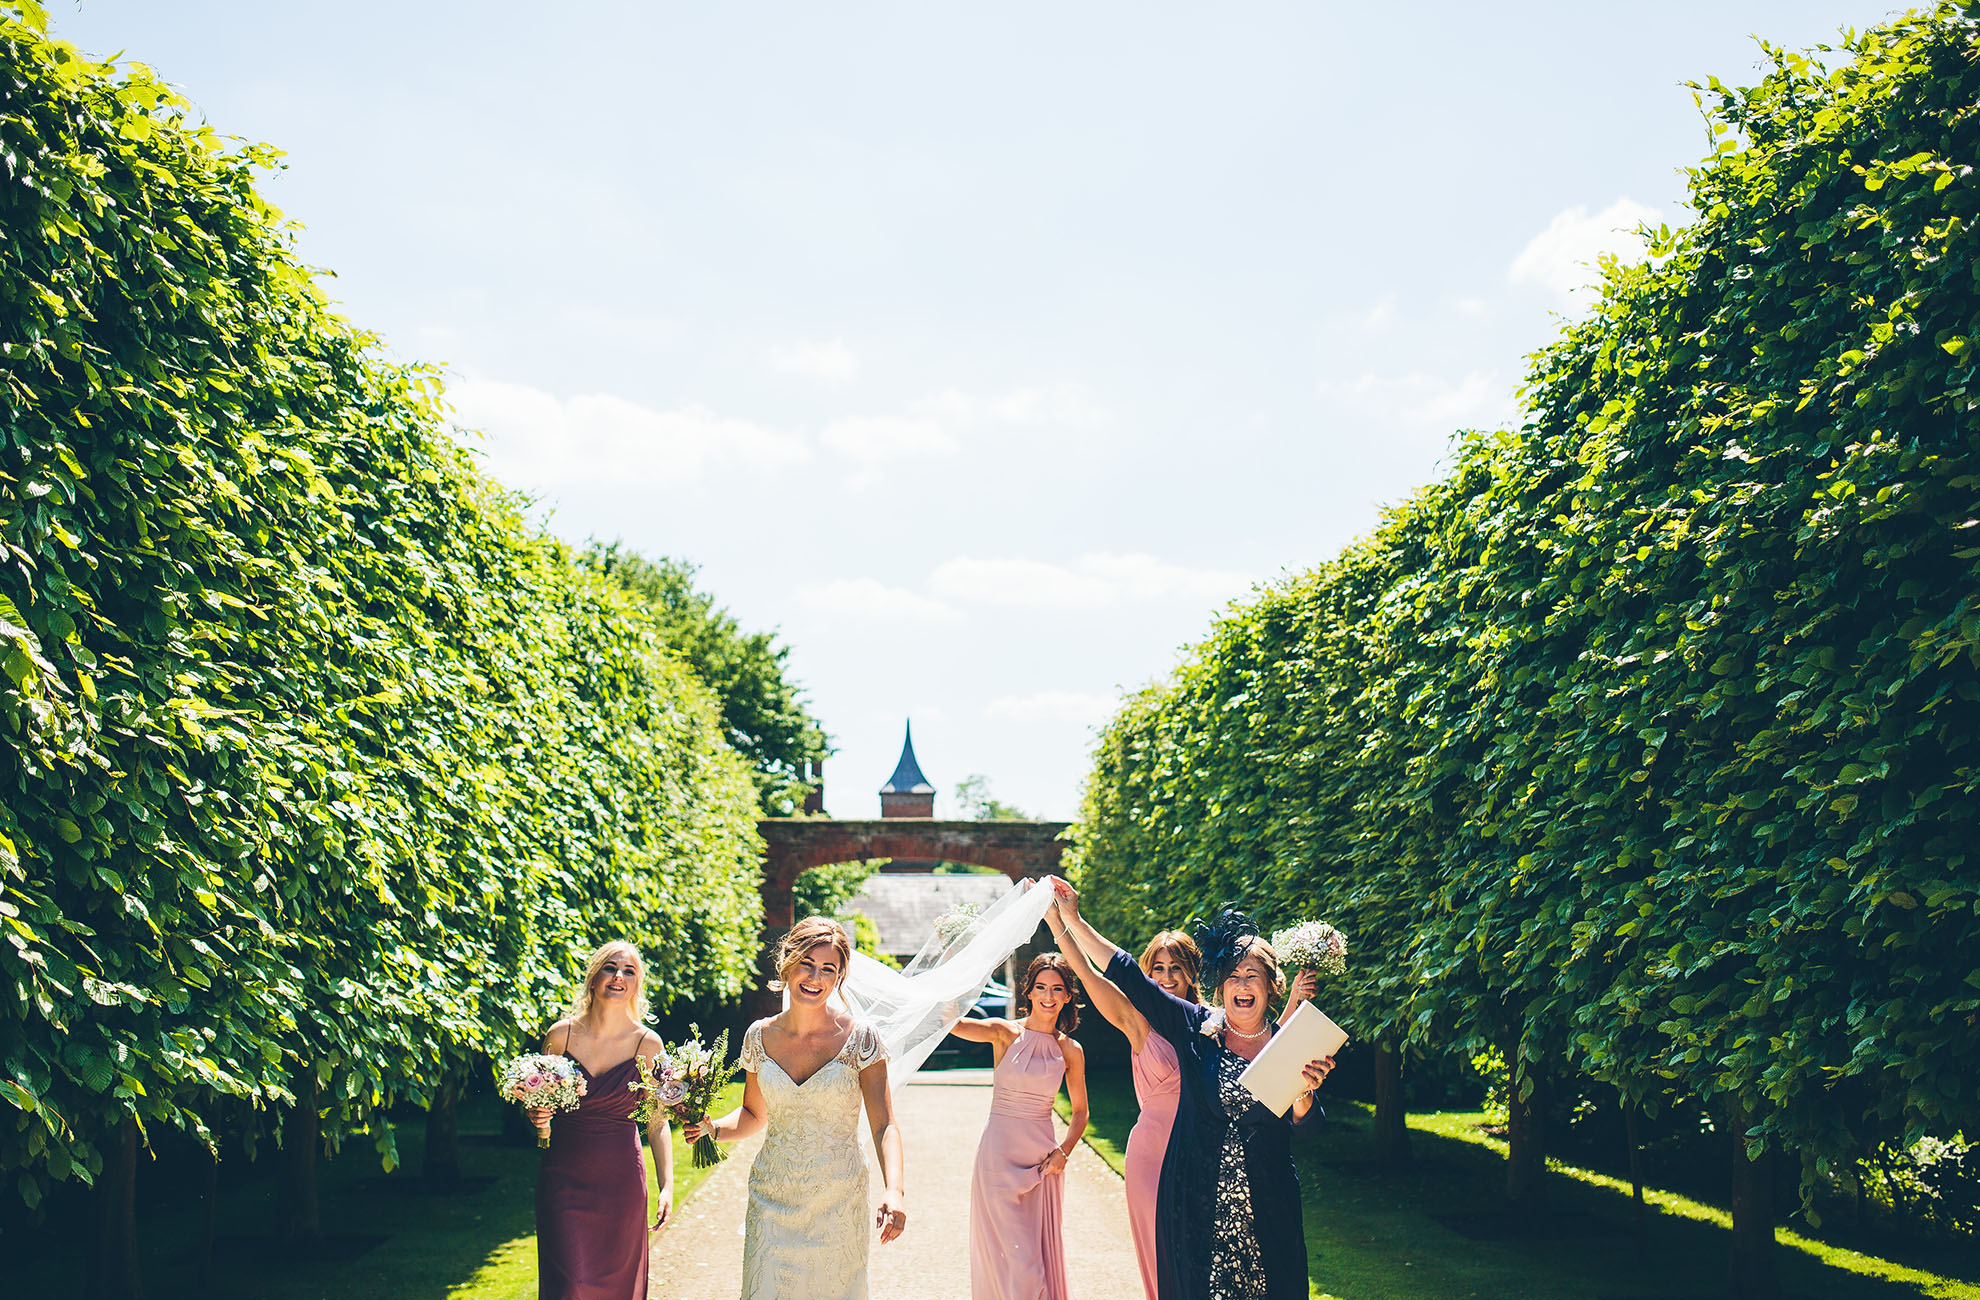 The bride and her bridal party make their way to the wedding ceremony in the Glasshouse at this Cheshire wedding venue